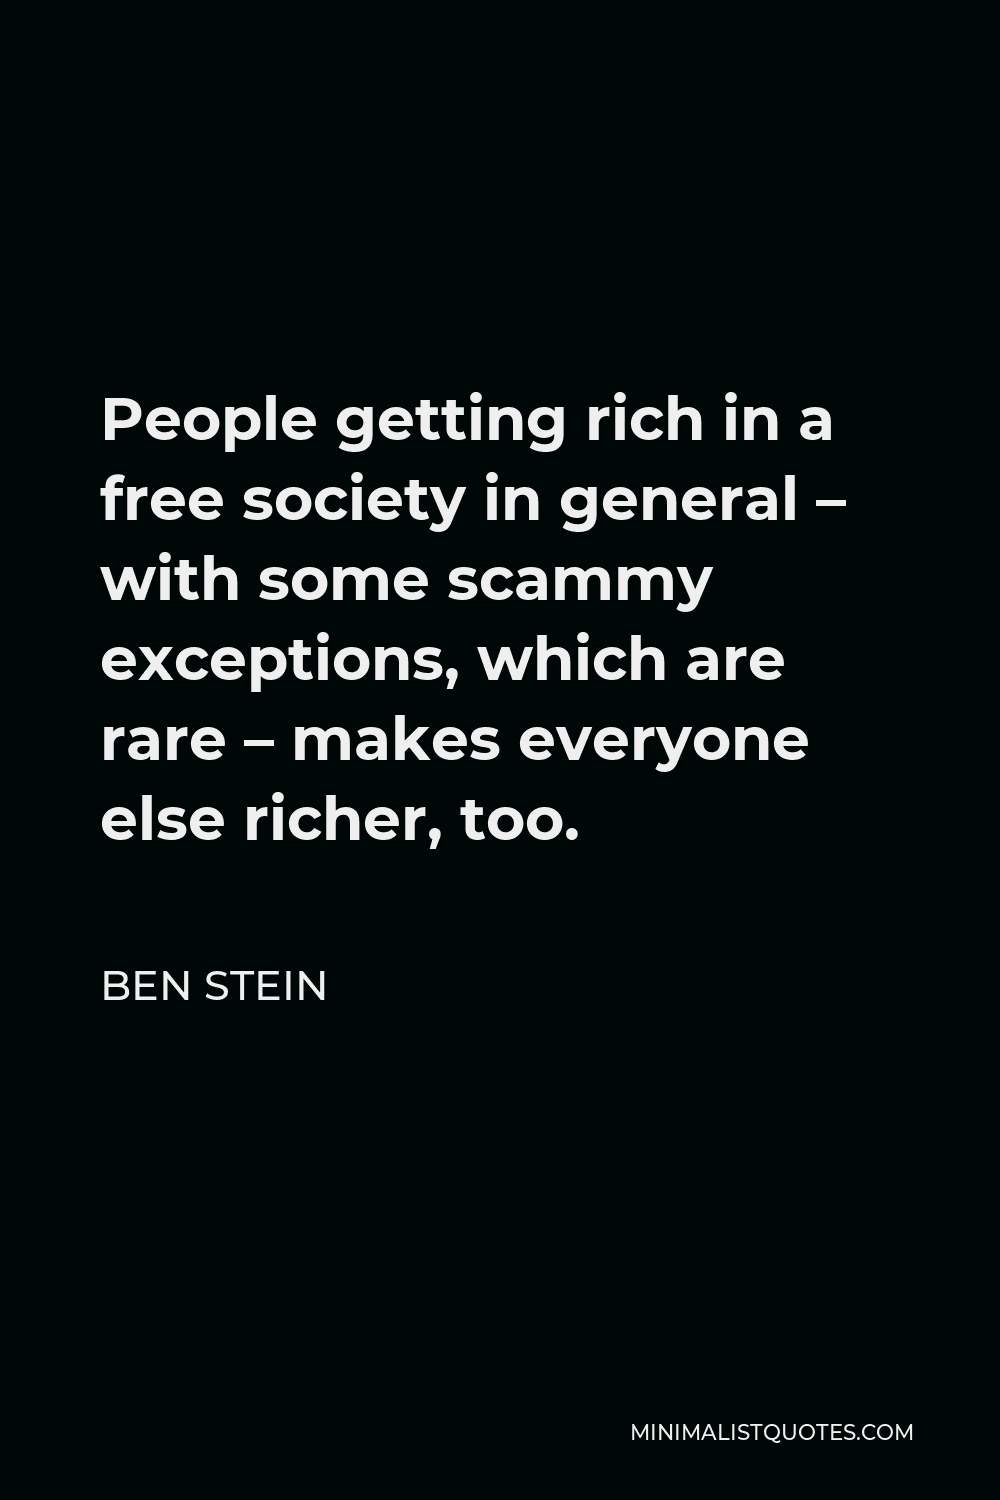 Ben Stein Quote - People getting rich in a free society in general – with some scammy exceptions, which are rare – makes everyone else richer, too.